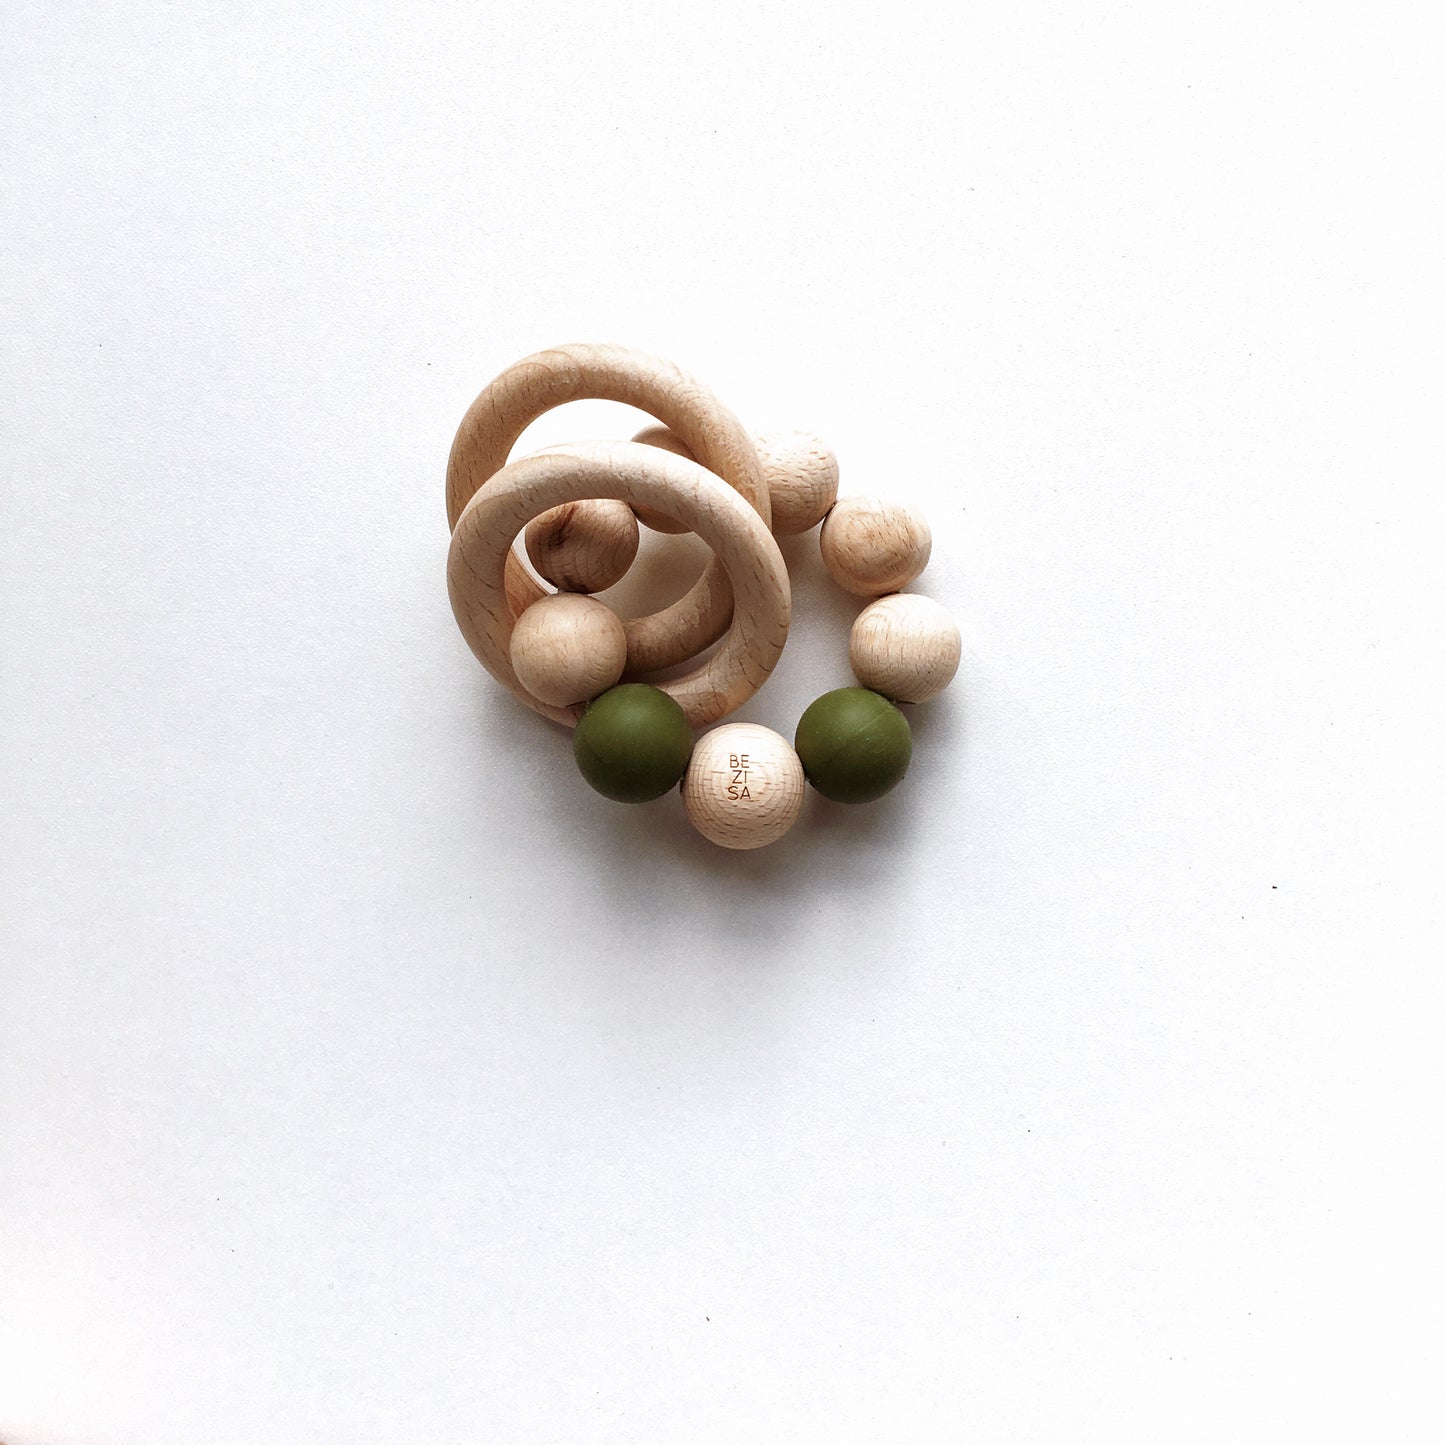 Bezisa wooden baby rattle with a mix of round wooden beads and olive coloured 100% silicone beads, plus two wooden rings. Product is photographed on a plain white background.